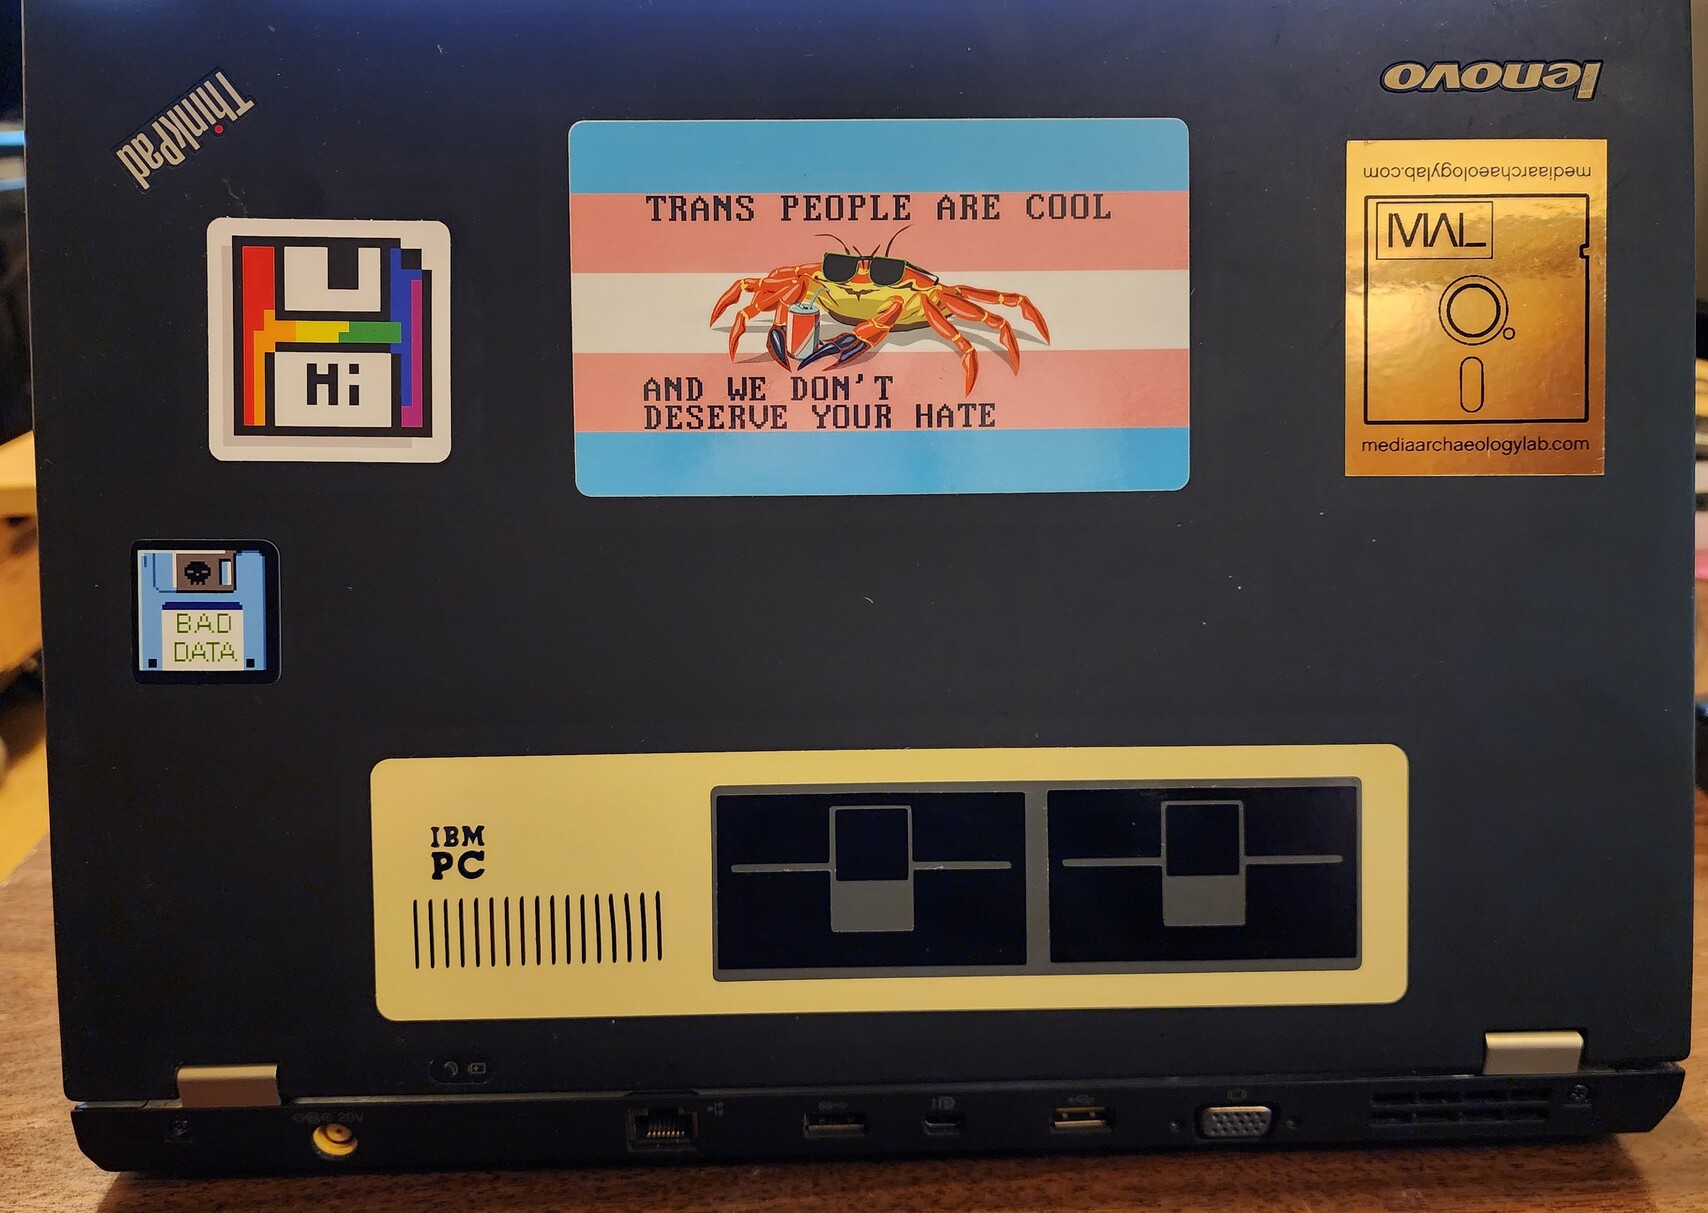 Back of a laptop. There's a trans pride flag sticker with a cool crab on it, and the text "trans people are cool, and we don't deserve your hate"

There's also three floppy disk stickers and an IBM PC sticker 